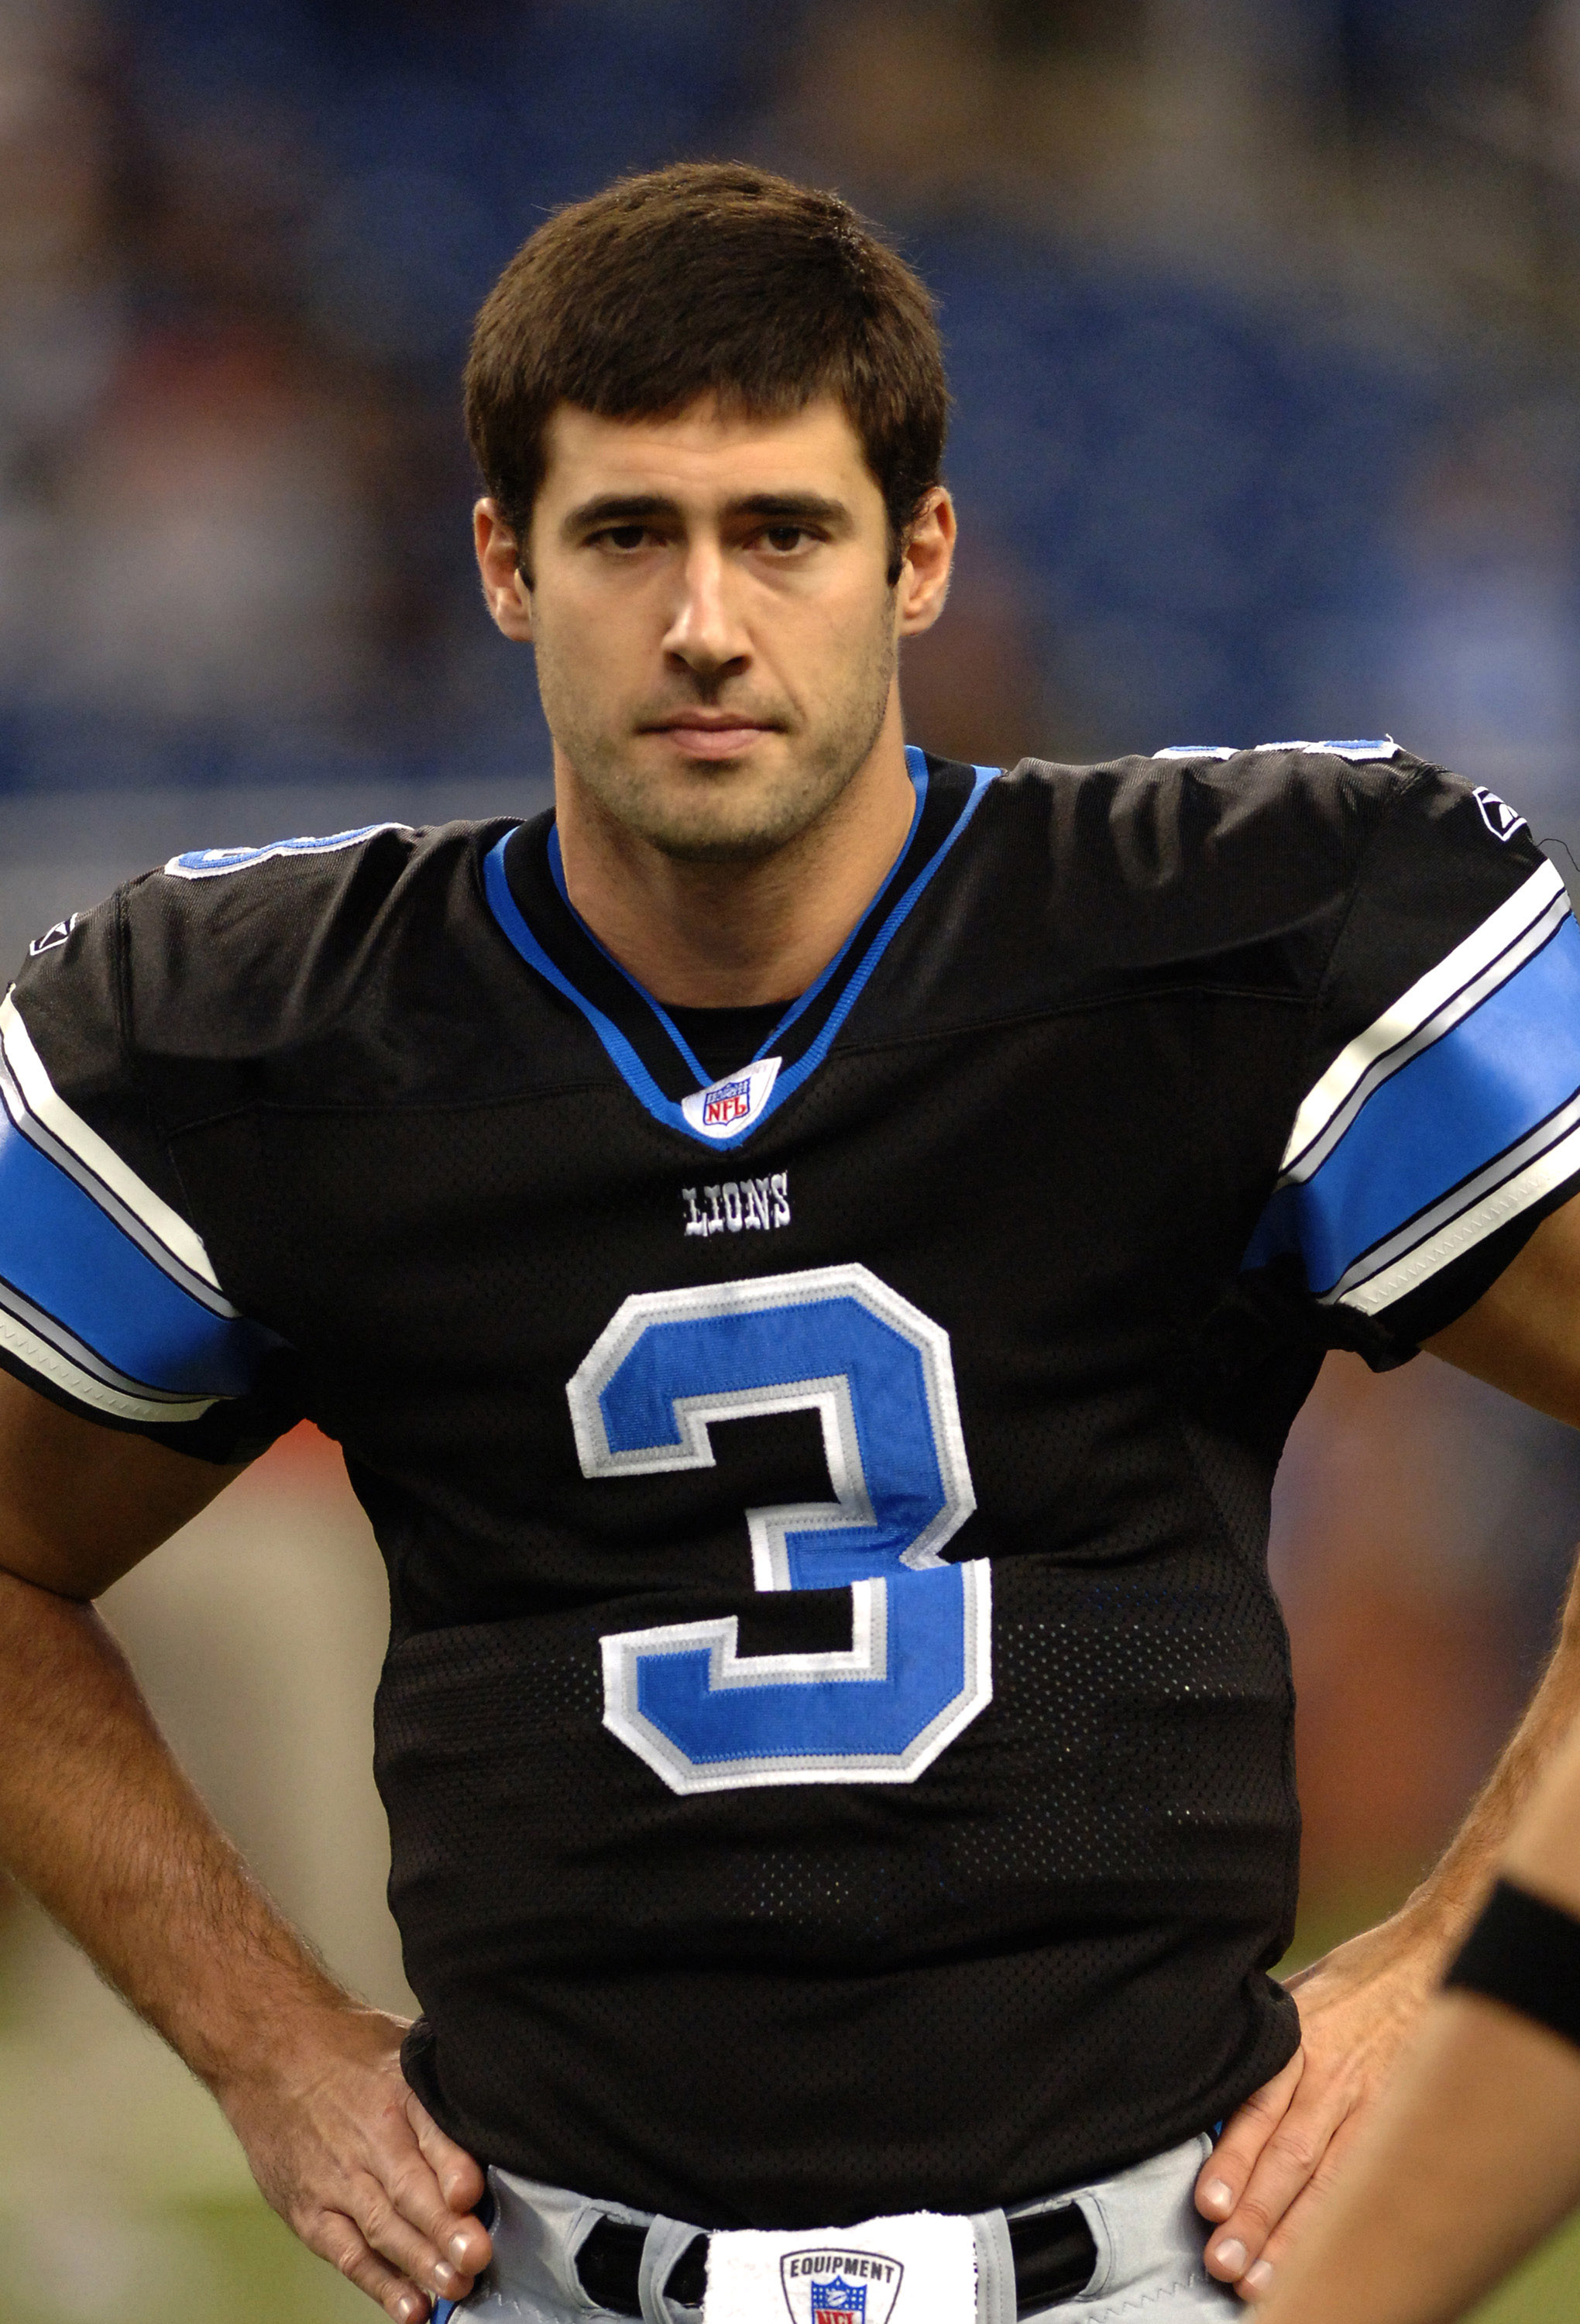 Detroit Lions quarterback Joey Harrington watches play in a Thanksgiving Day game, November 24, 2005, at Ford Field, Detroit.  The Atlanta Falcons defeated the Lions 27 - 7.  (Photo by Al Messerschmidt/Getty Images)